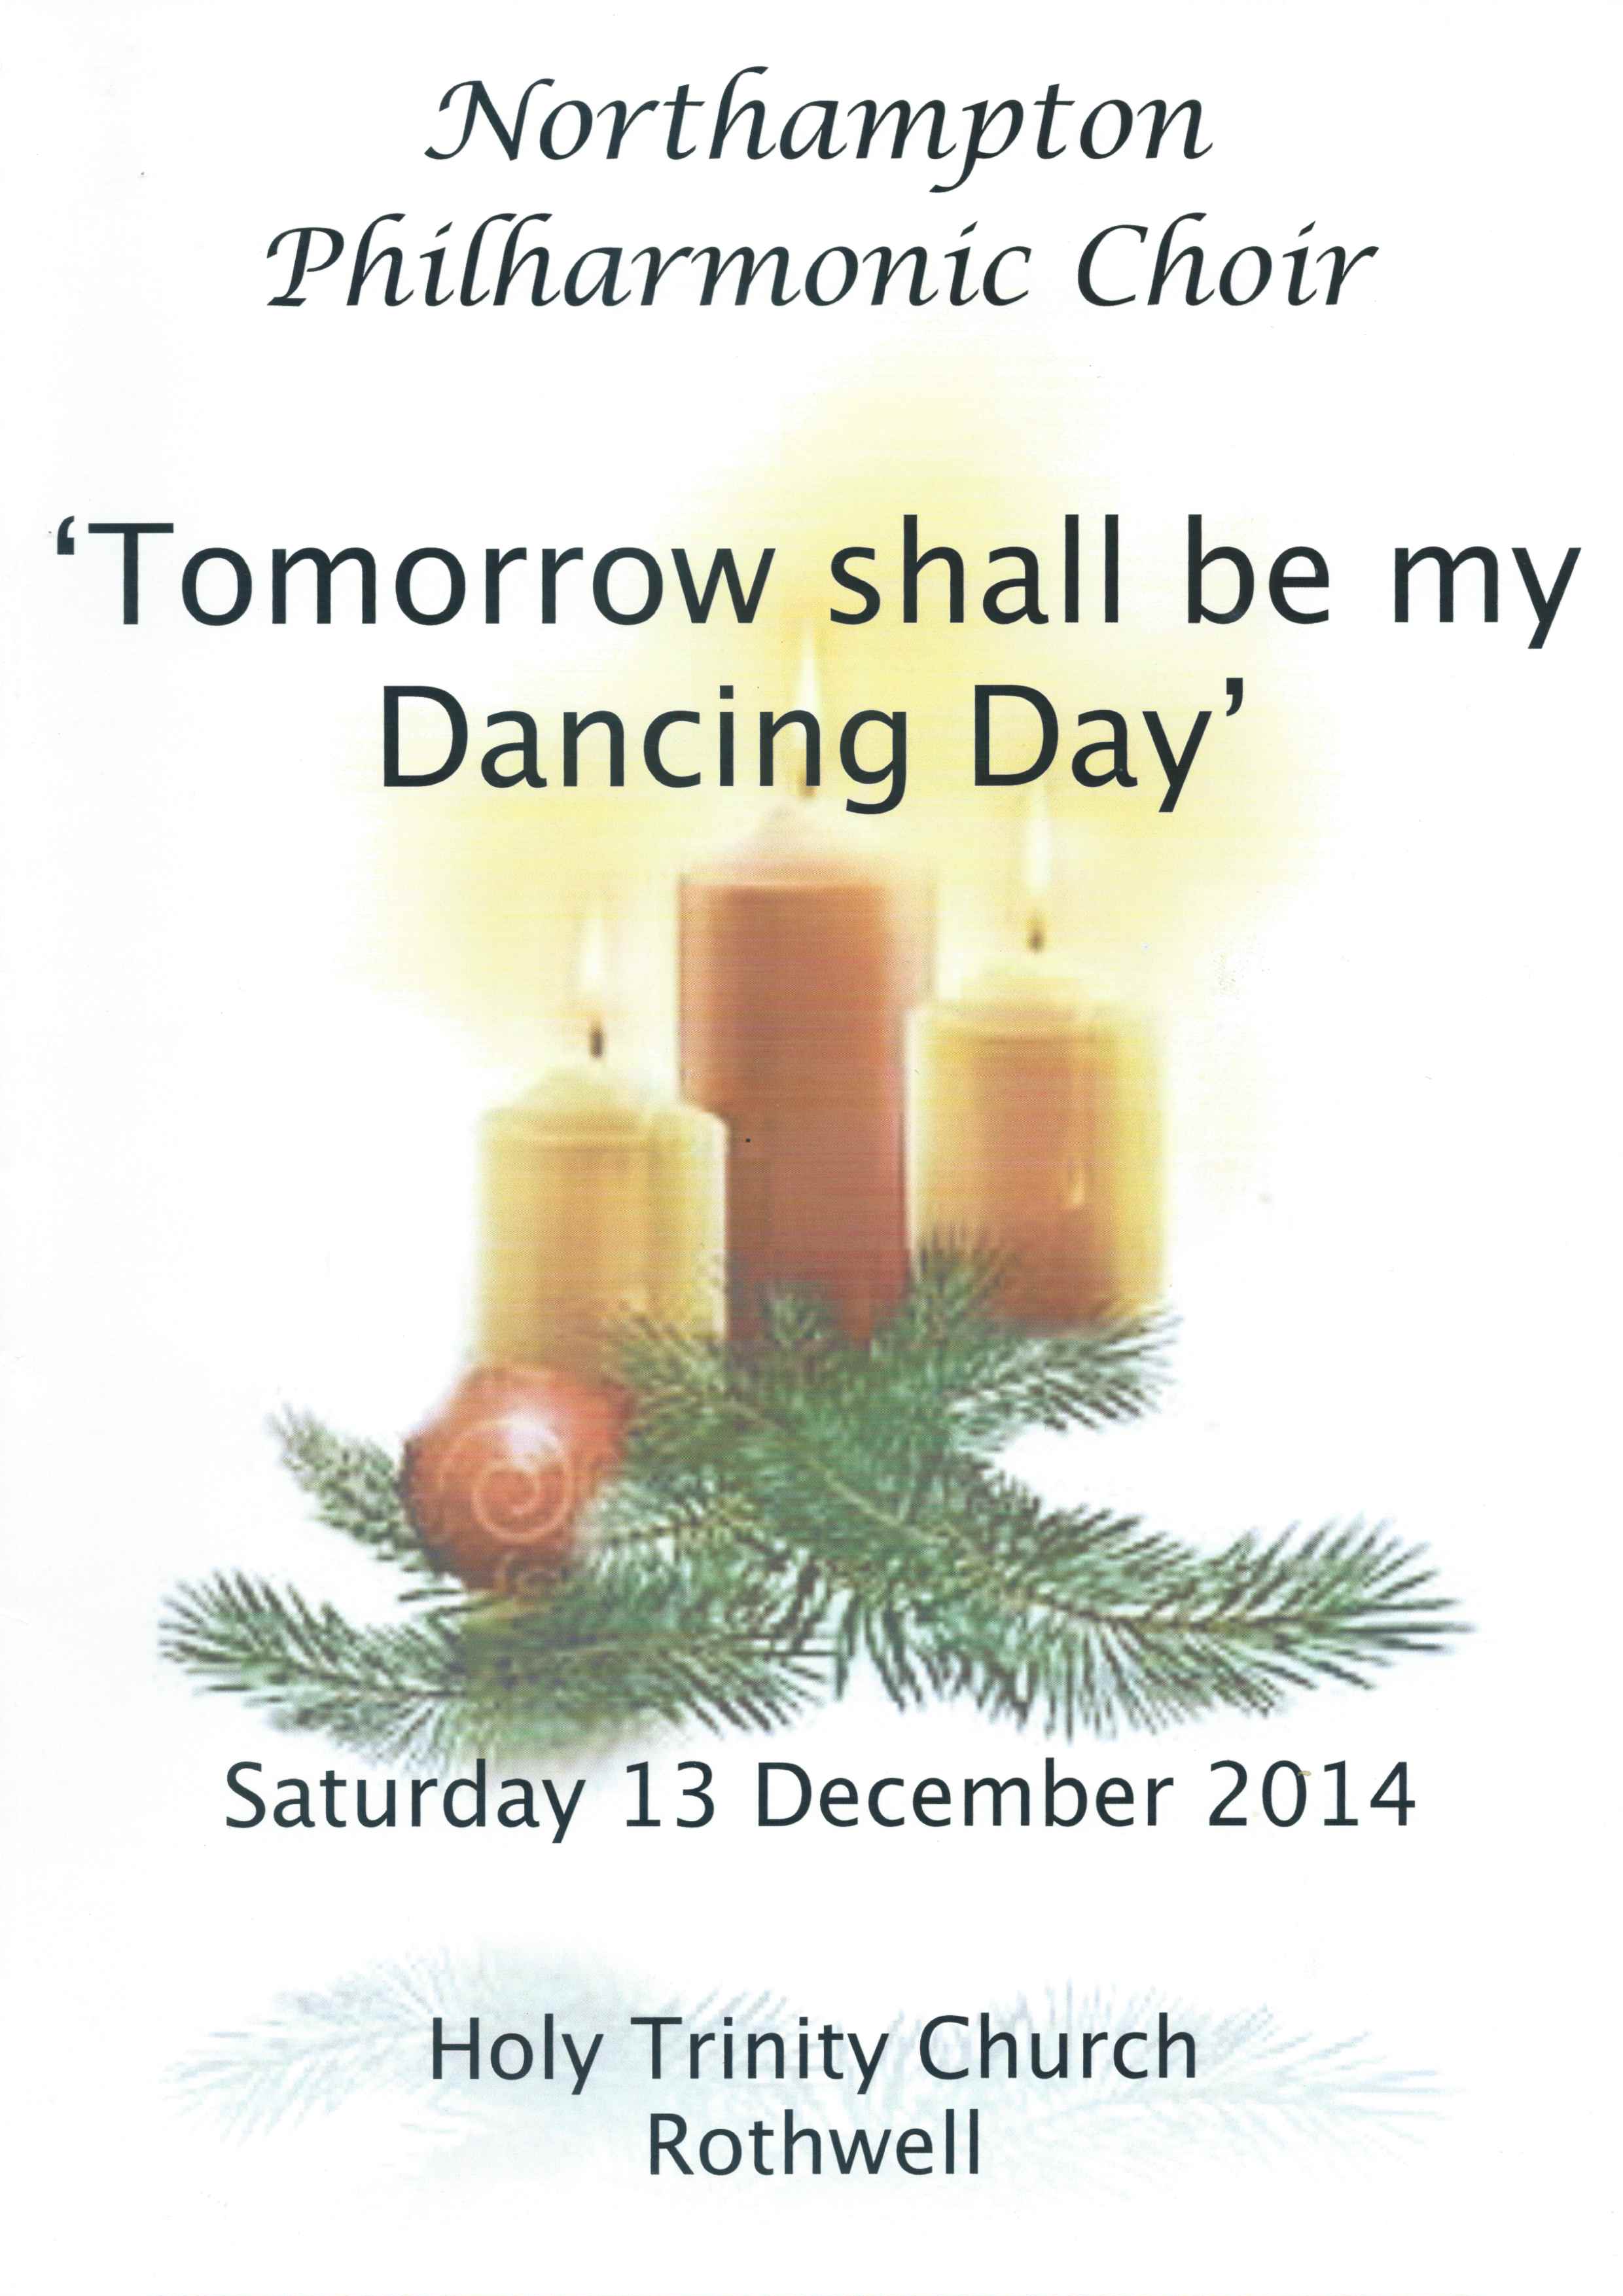 Tomorrow Shall be My Dancing Day at Holy Trinity Church in Rothwell